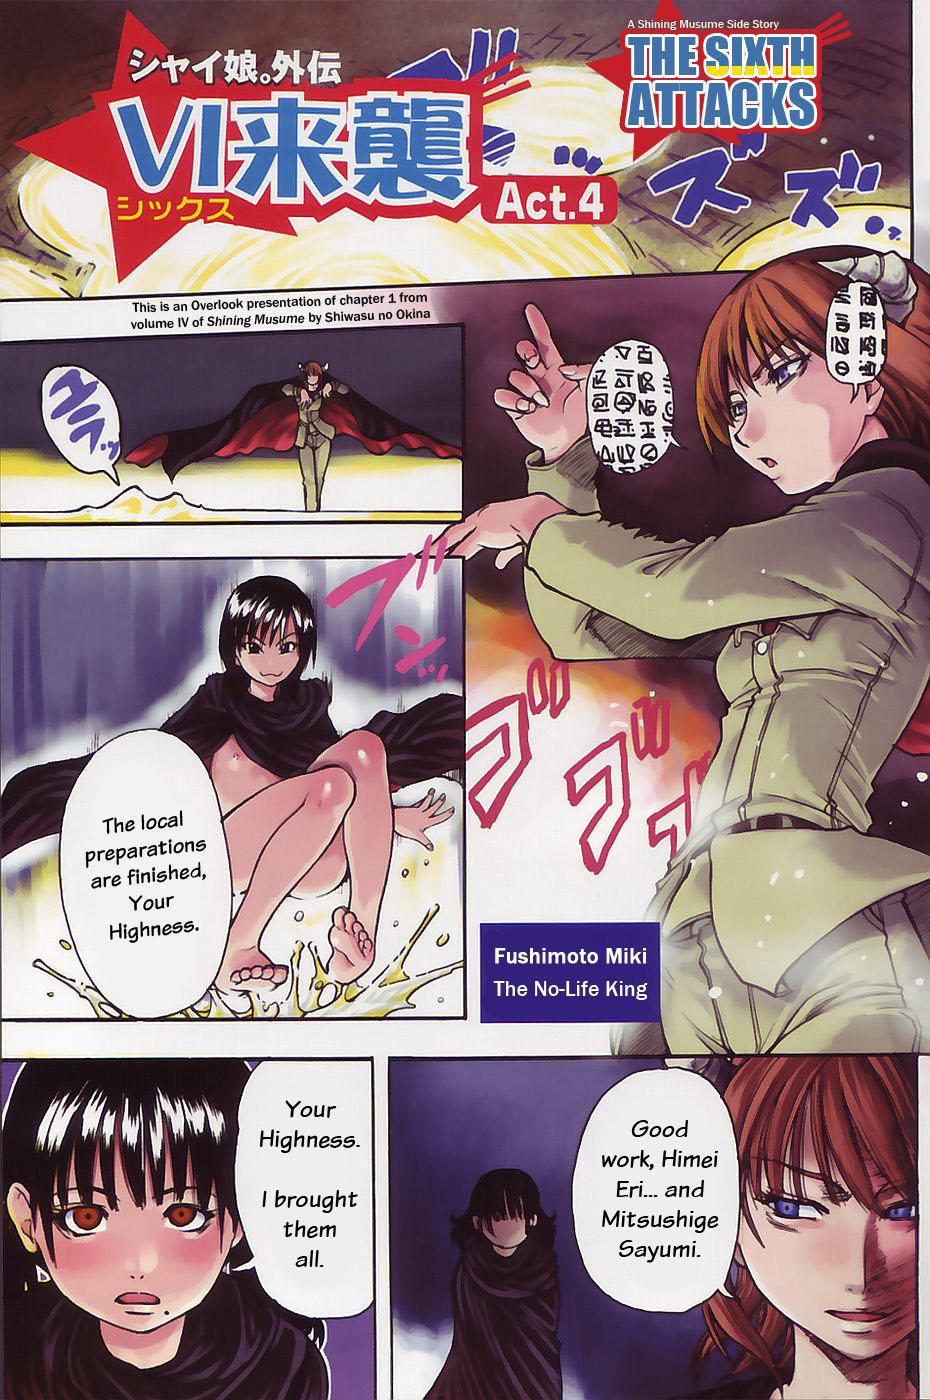 Argentino Shining Musume 4. Number Four Amateurs Gone - Page 2